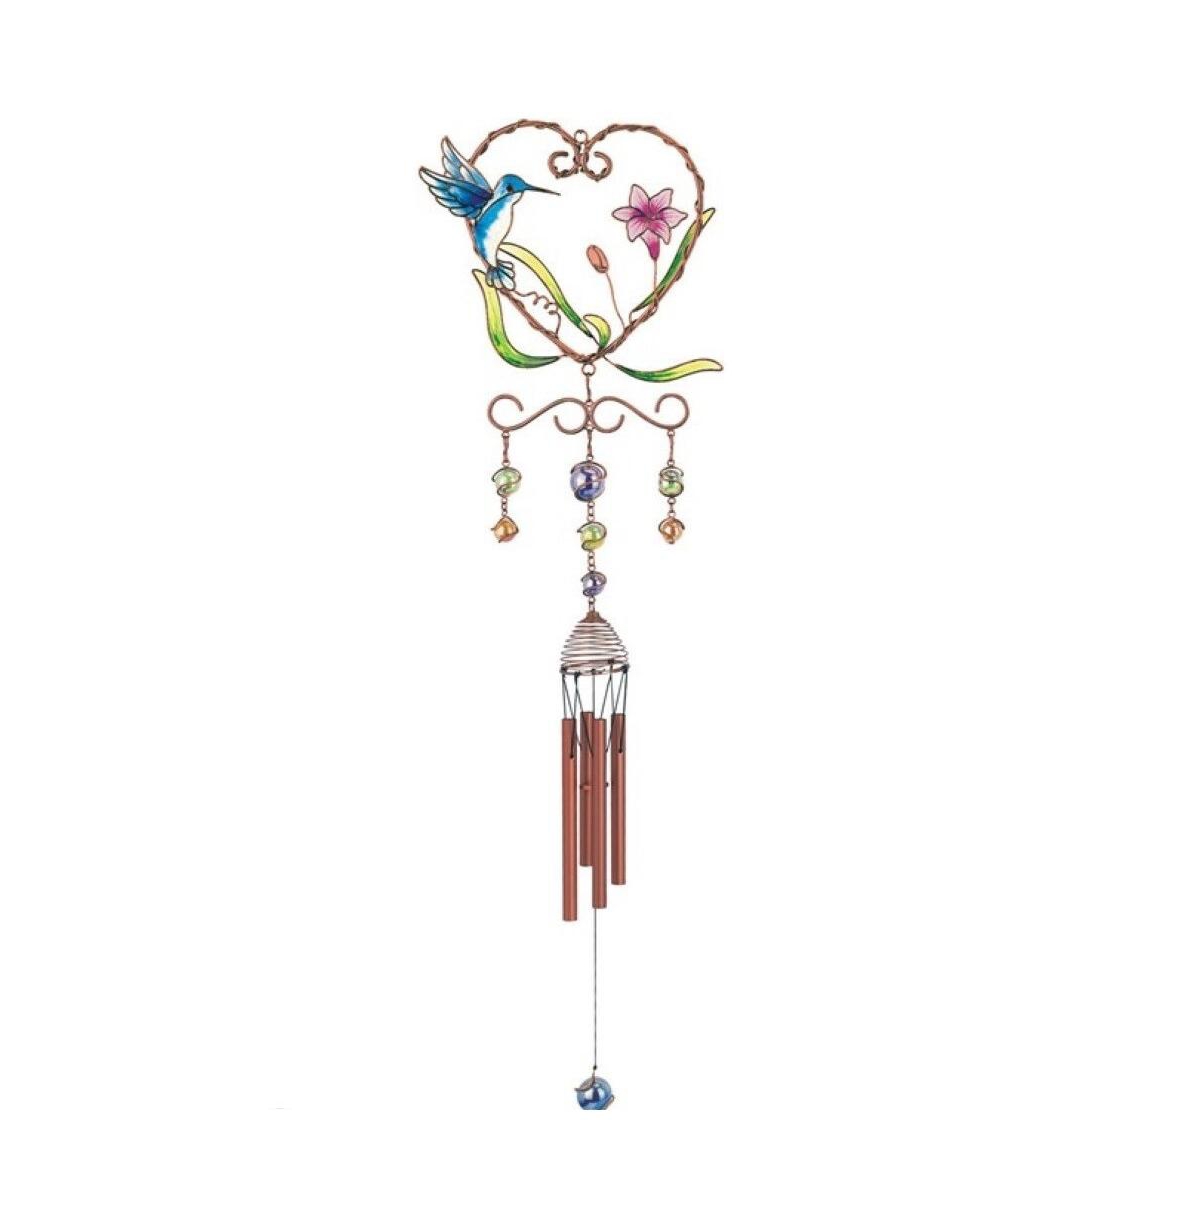 33" Long Blue Hummingbird with Flower Heart Shaped Wind Chime Home Decor Perfect Gift for House Warming, Holidays and Birthdays - Multi